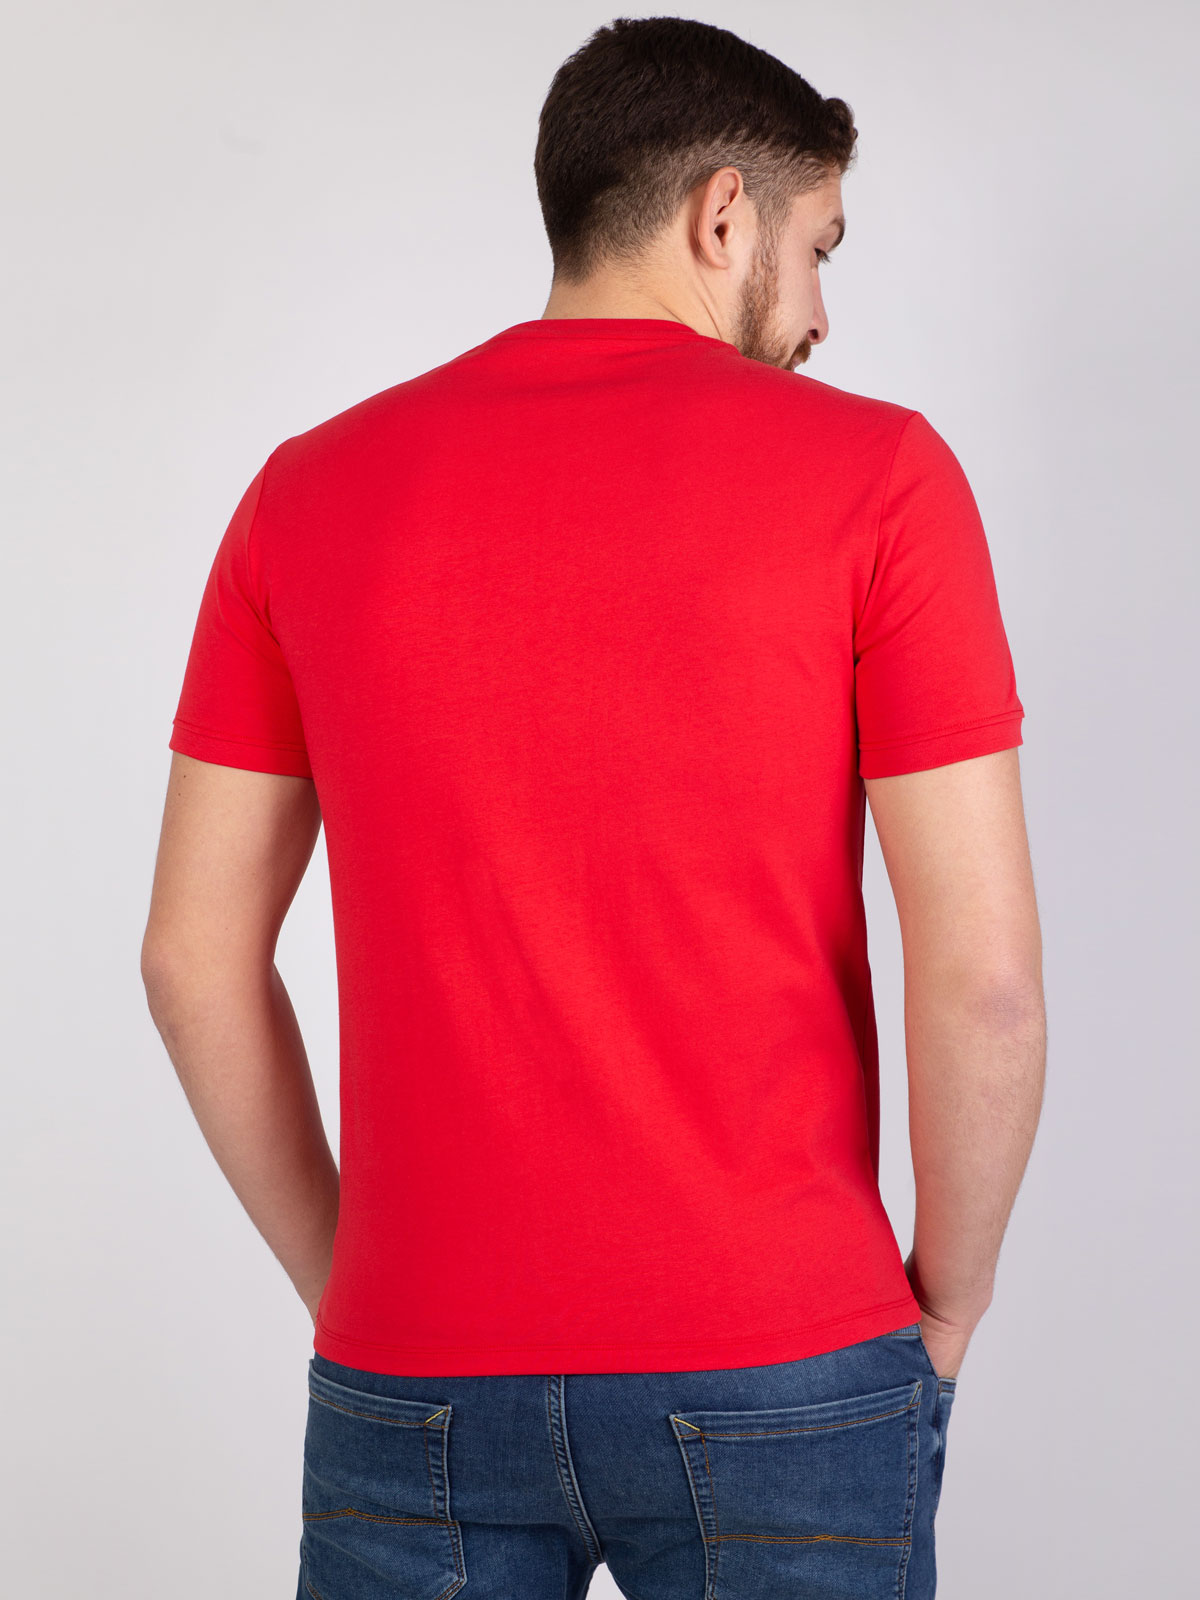 Red tshirt with blue print - 96389 € 12.37 img4